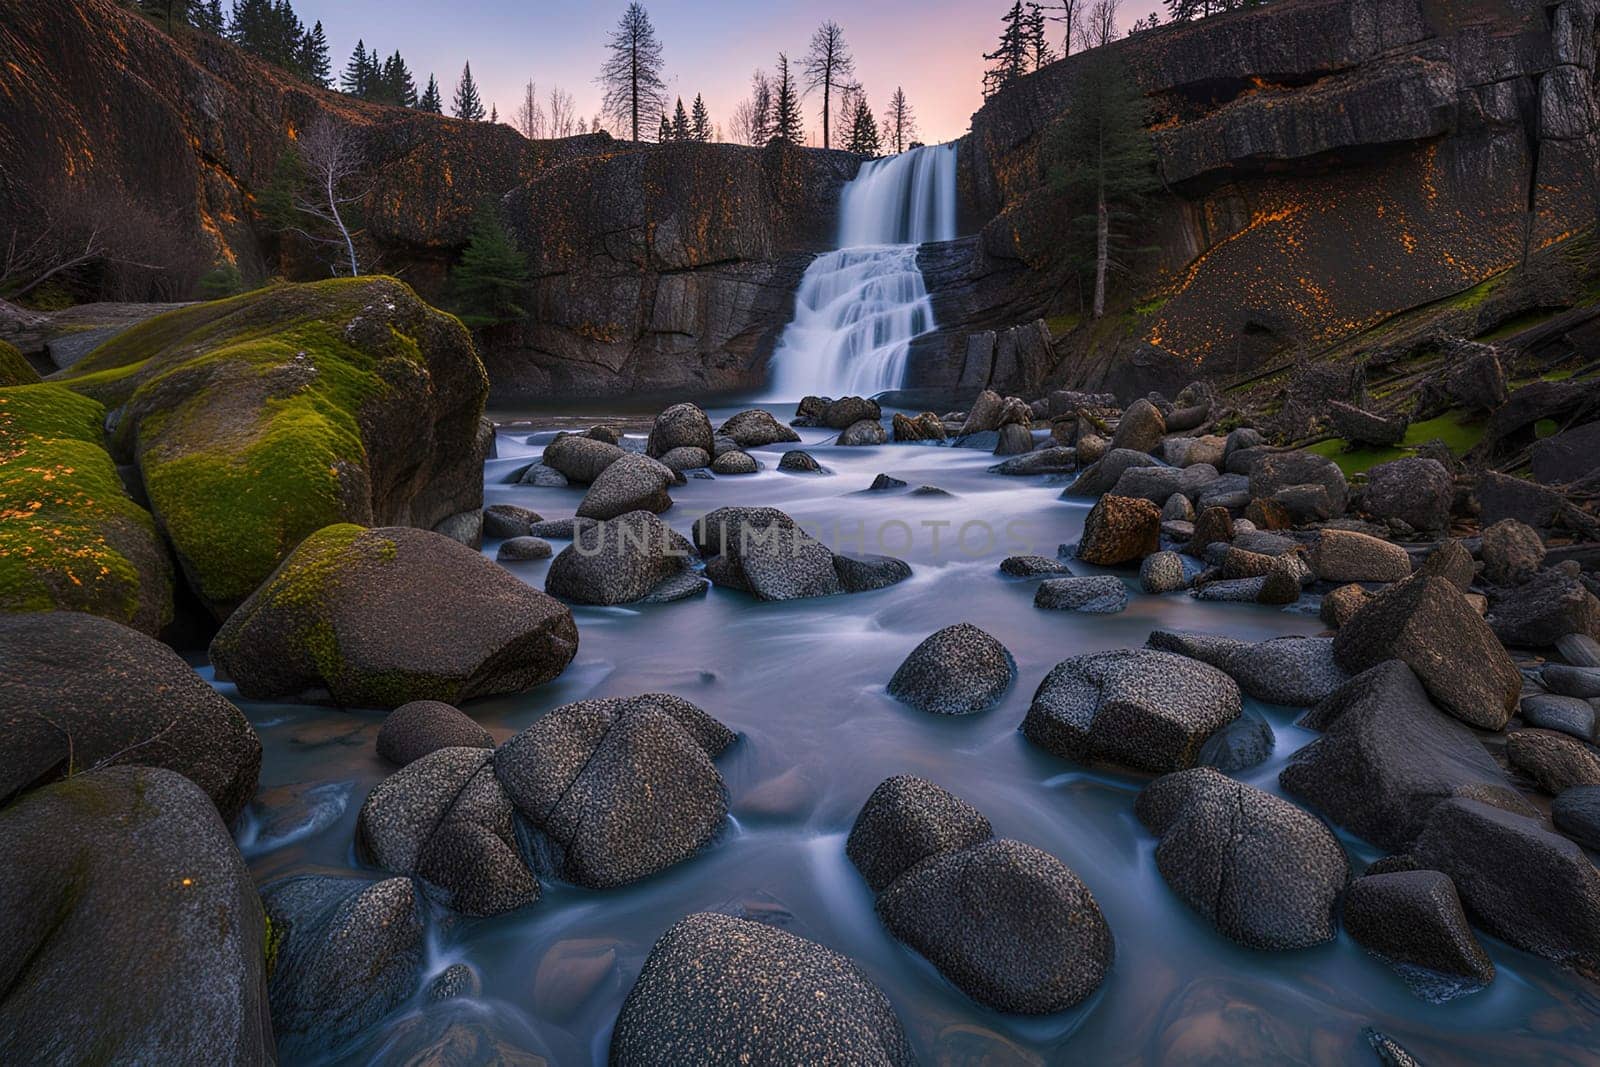 Long exposure of a waterfall in the forest at sunrise. Long exposure photography